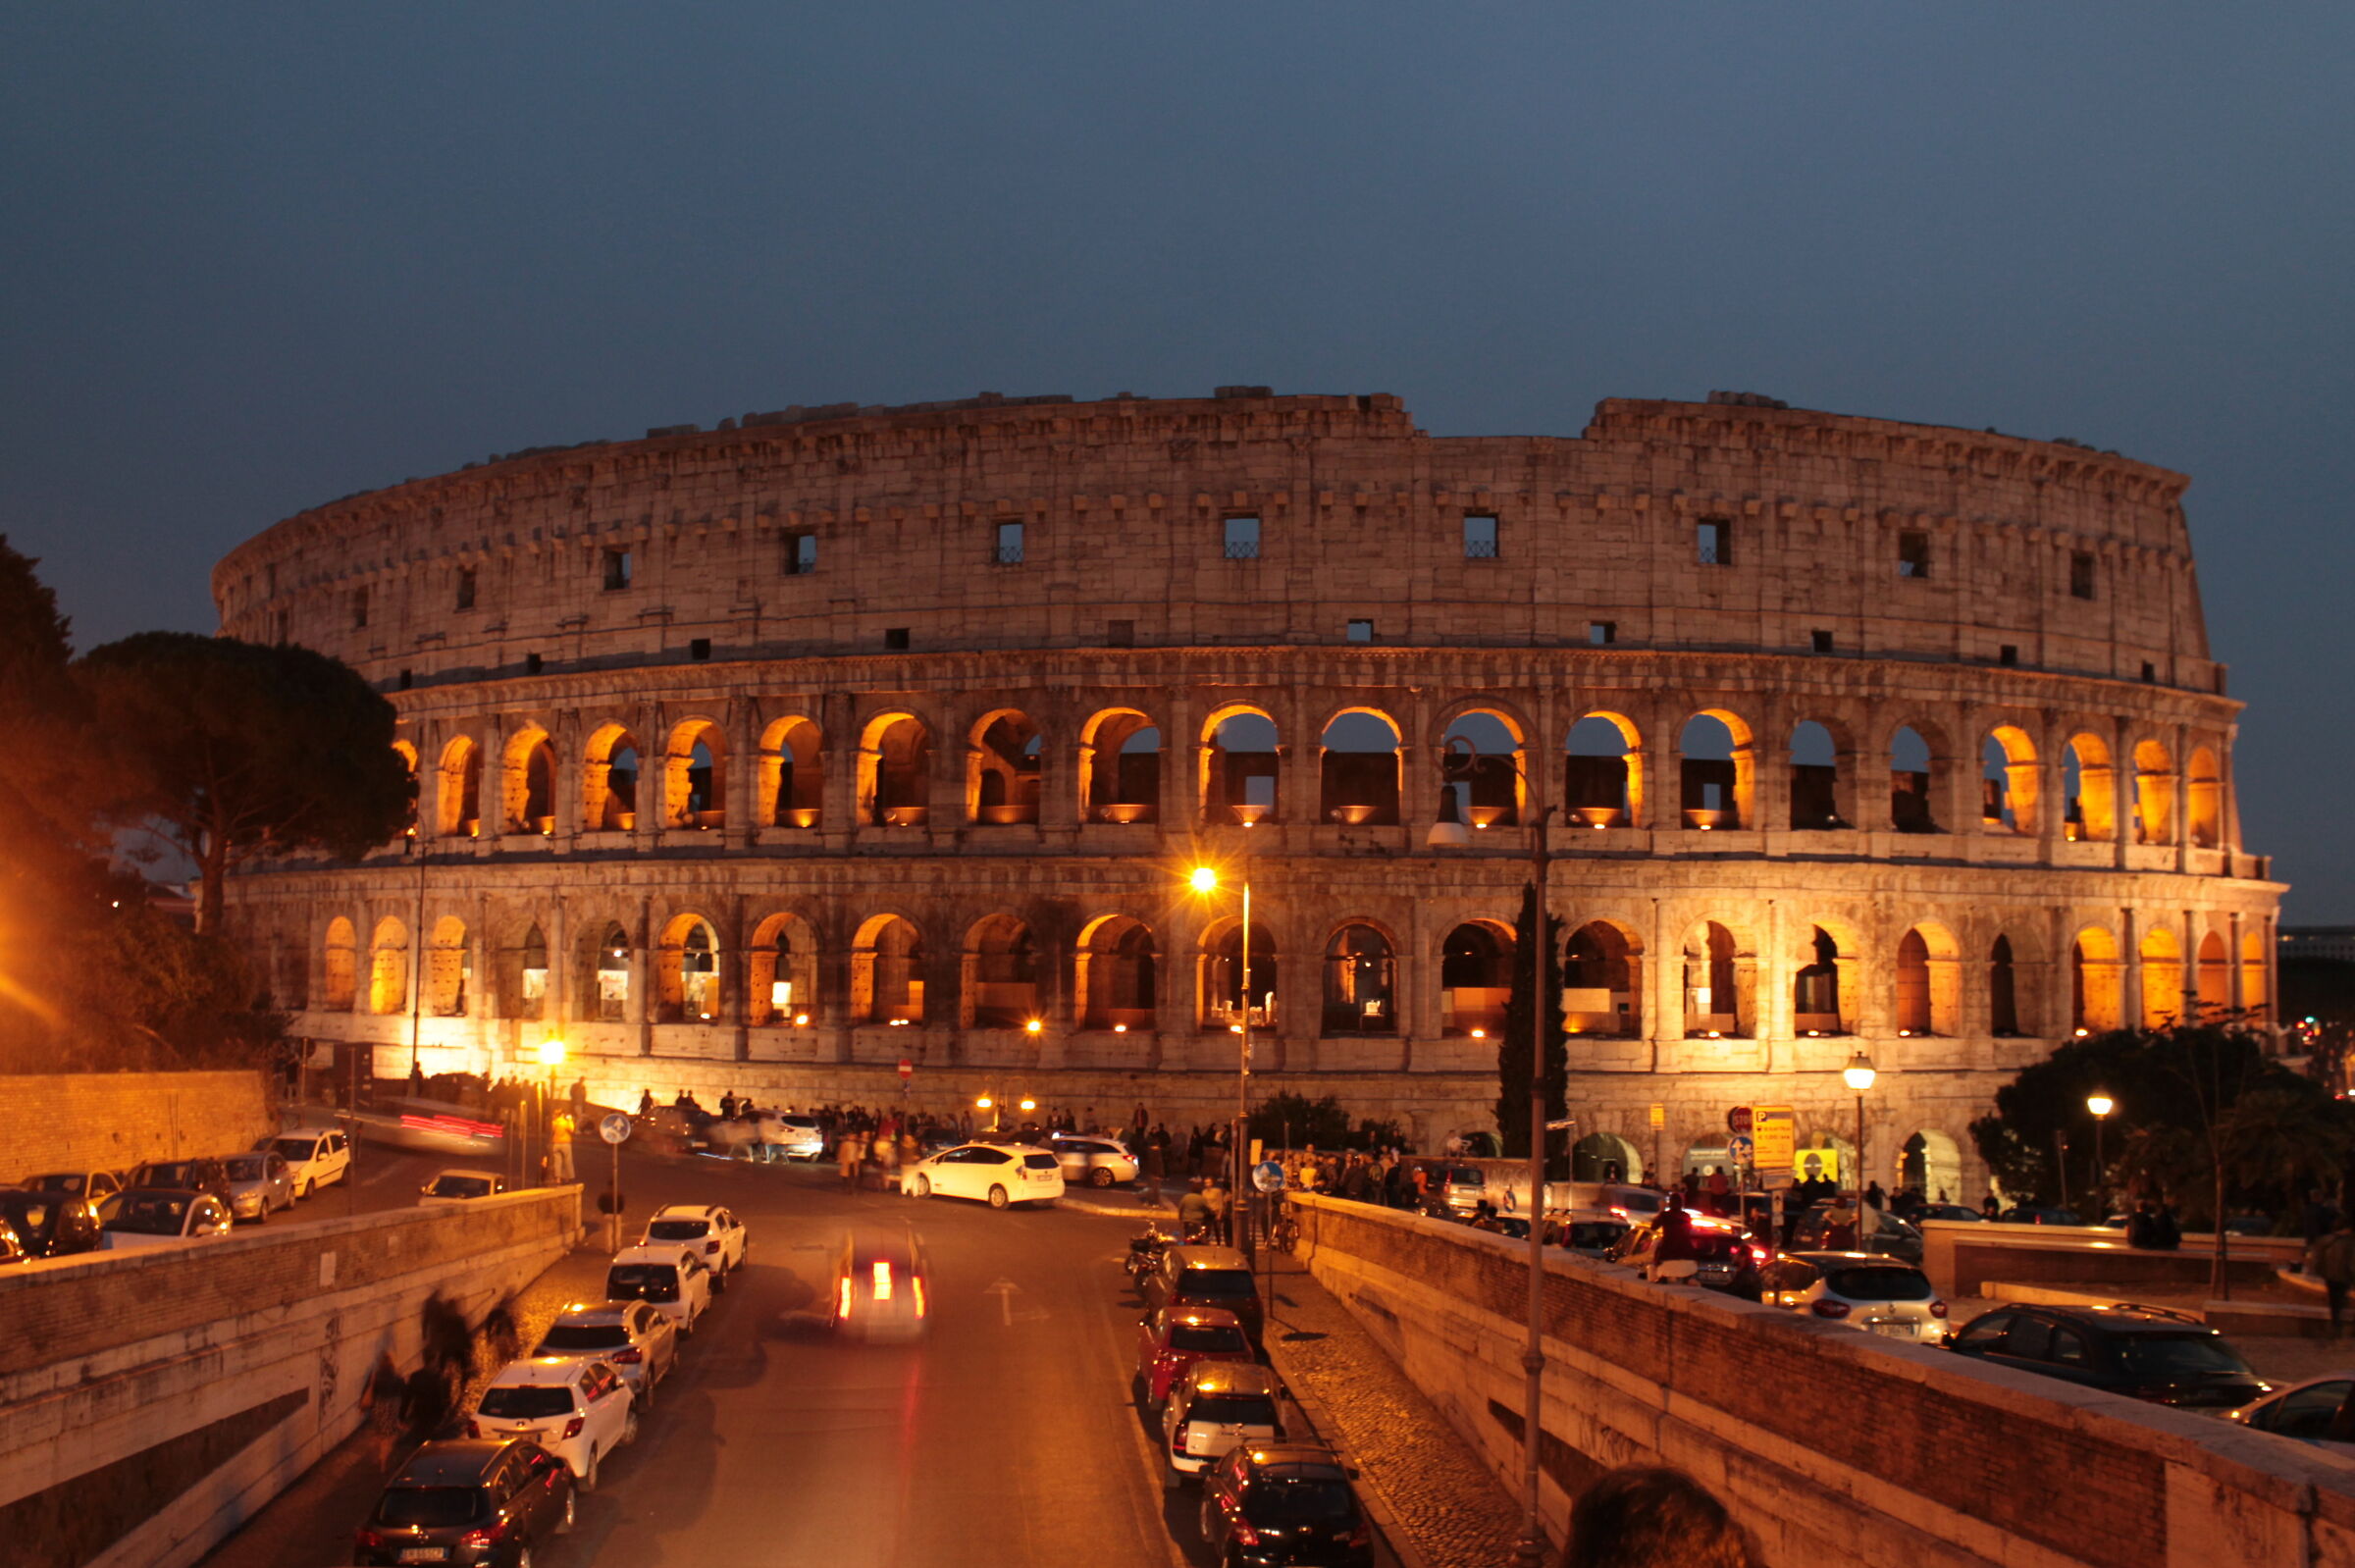 His Majesty the Colosseum ...